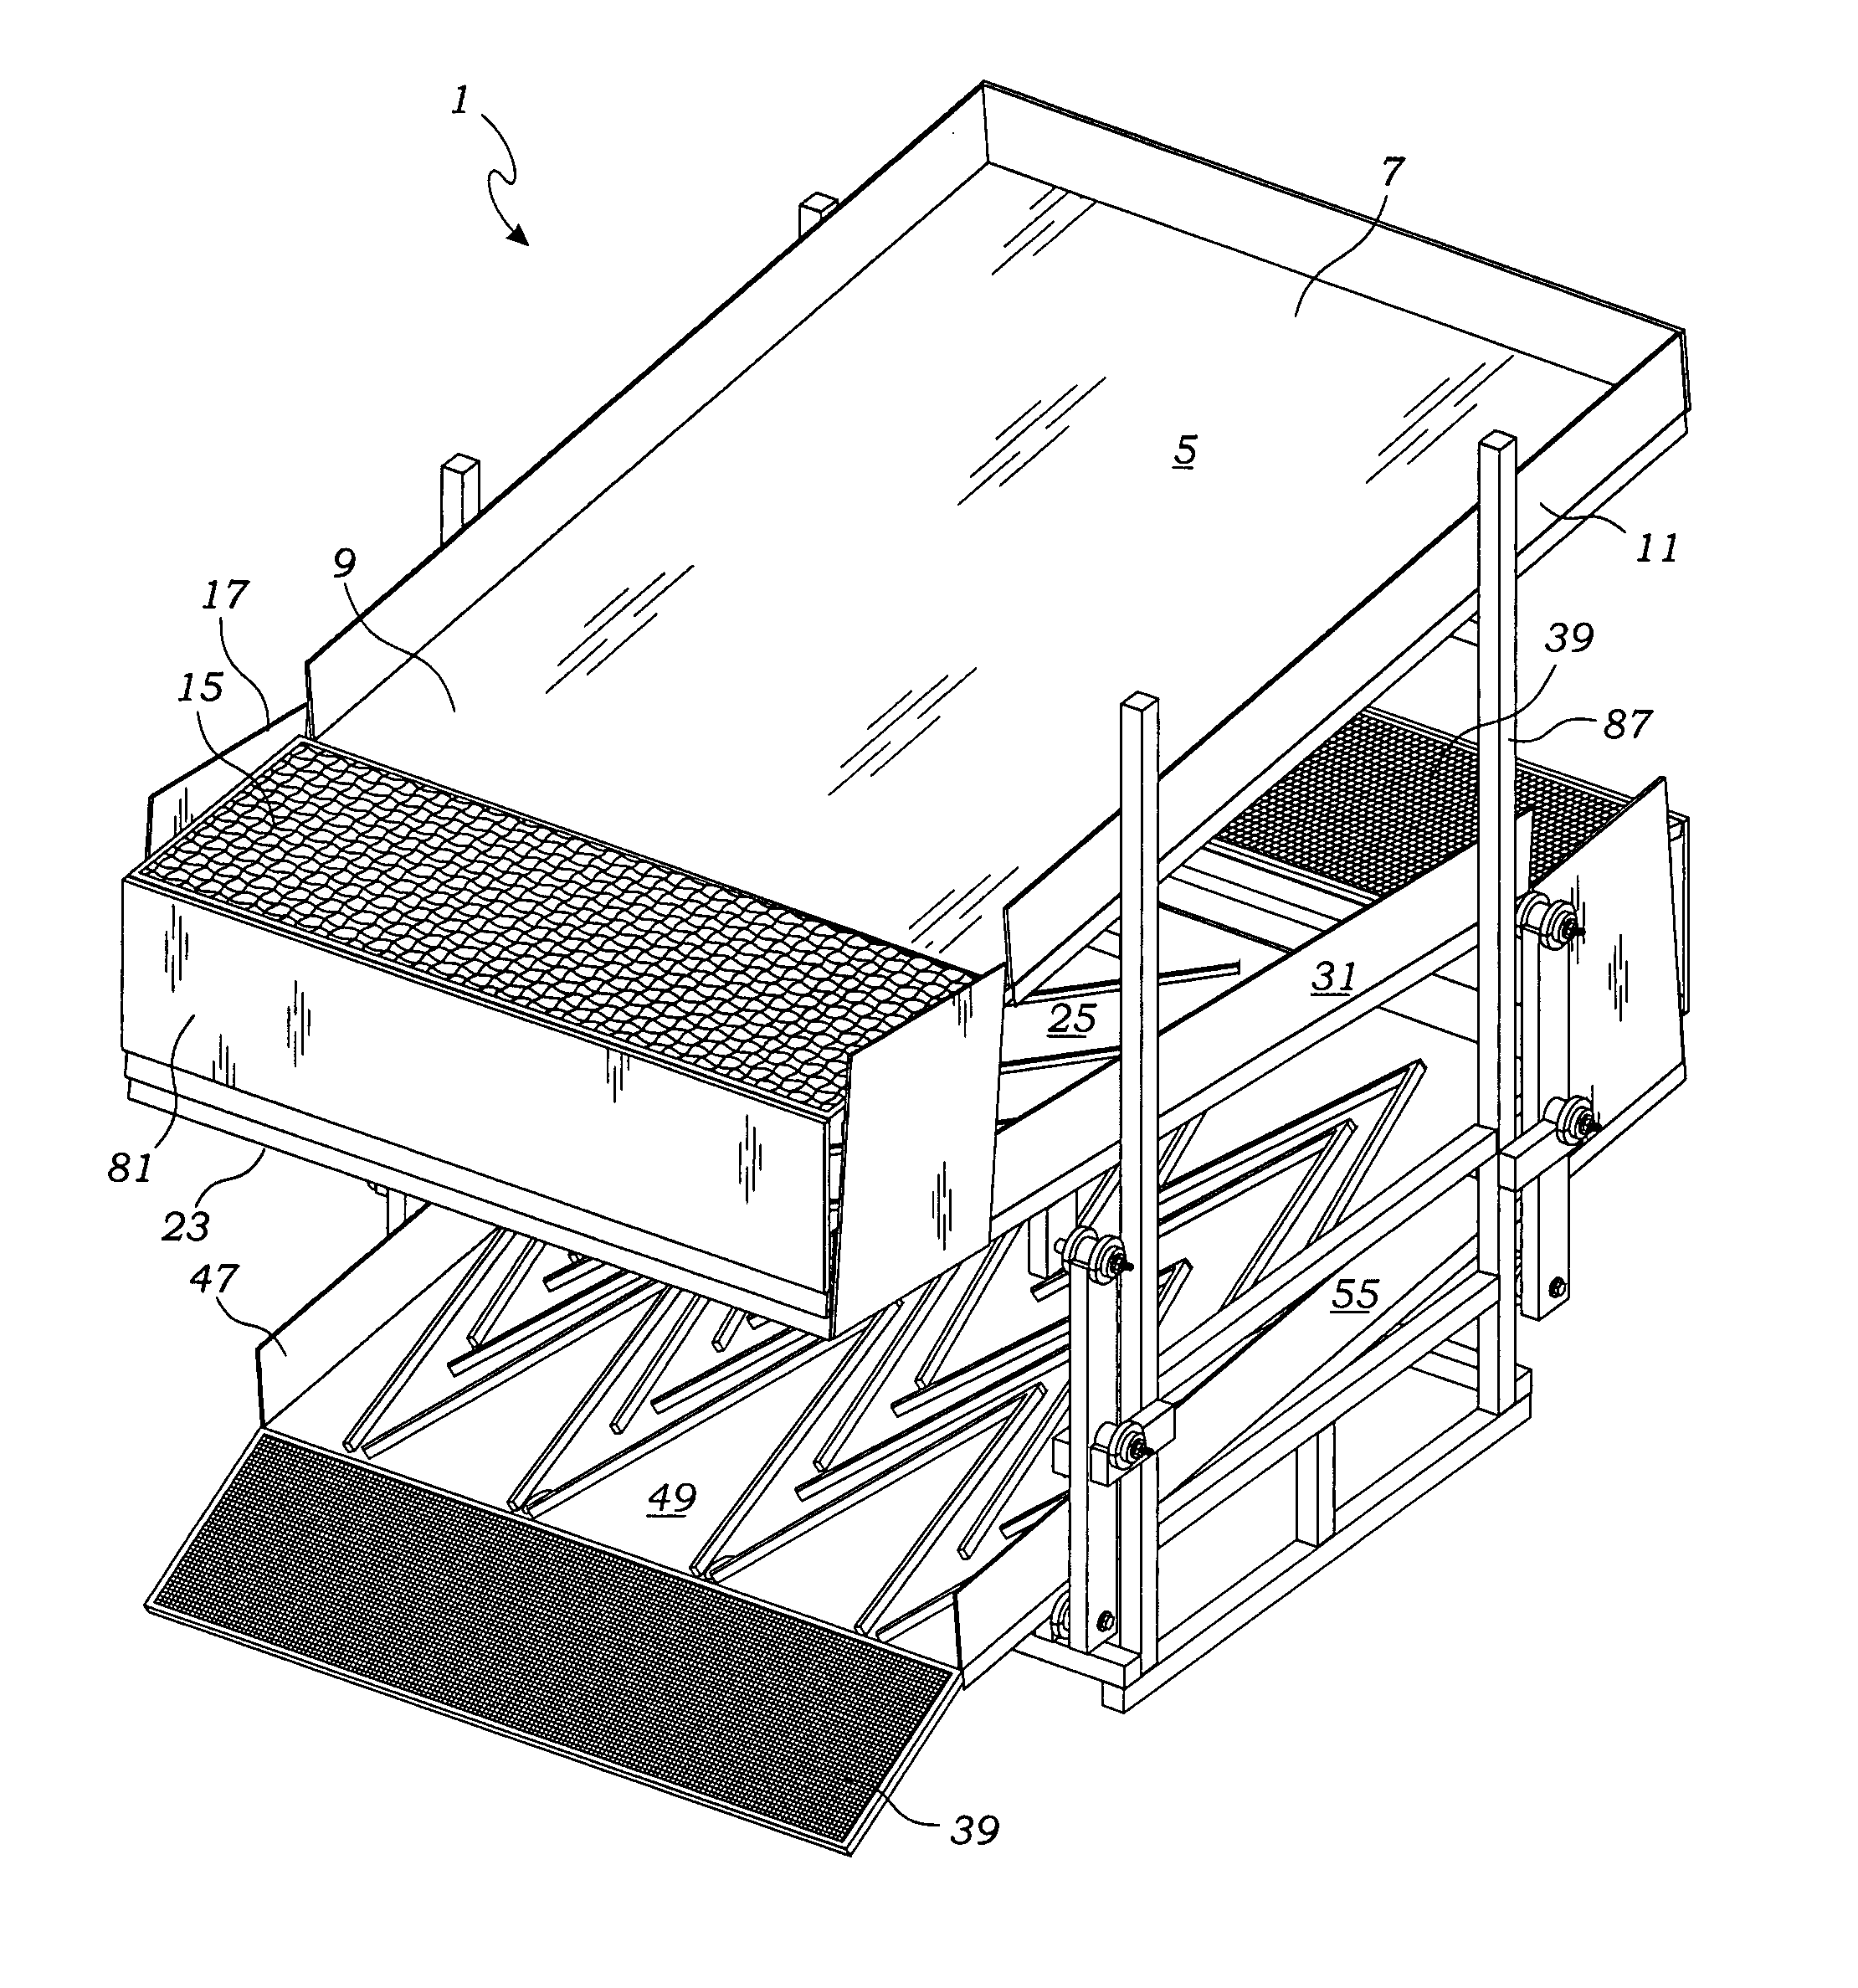 Sluice assembly for separating heavy particles from slurry